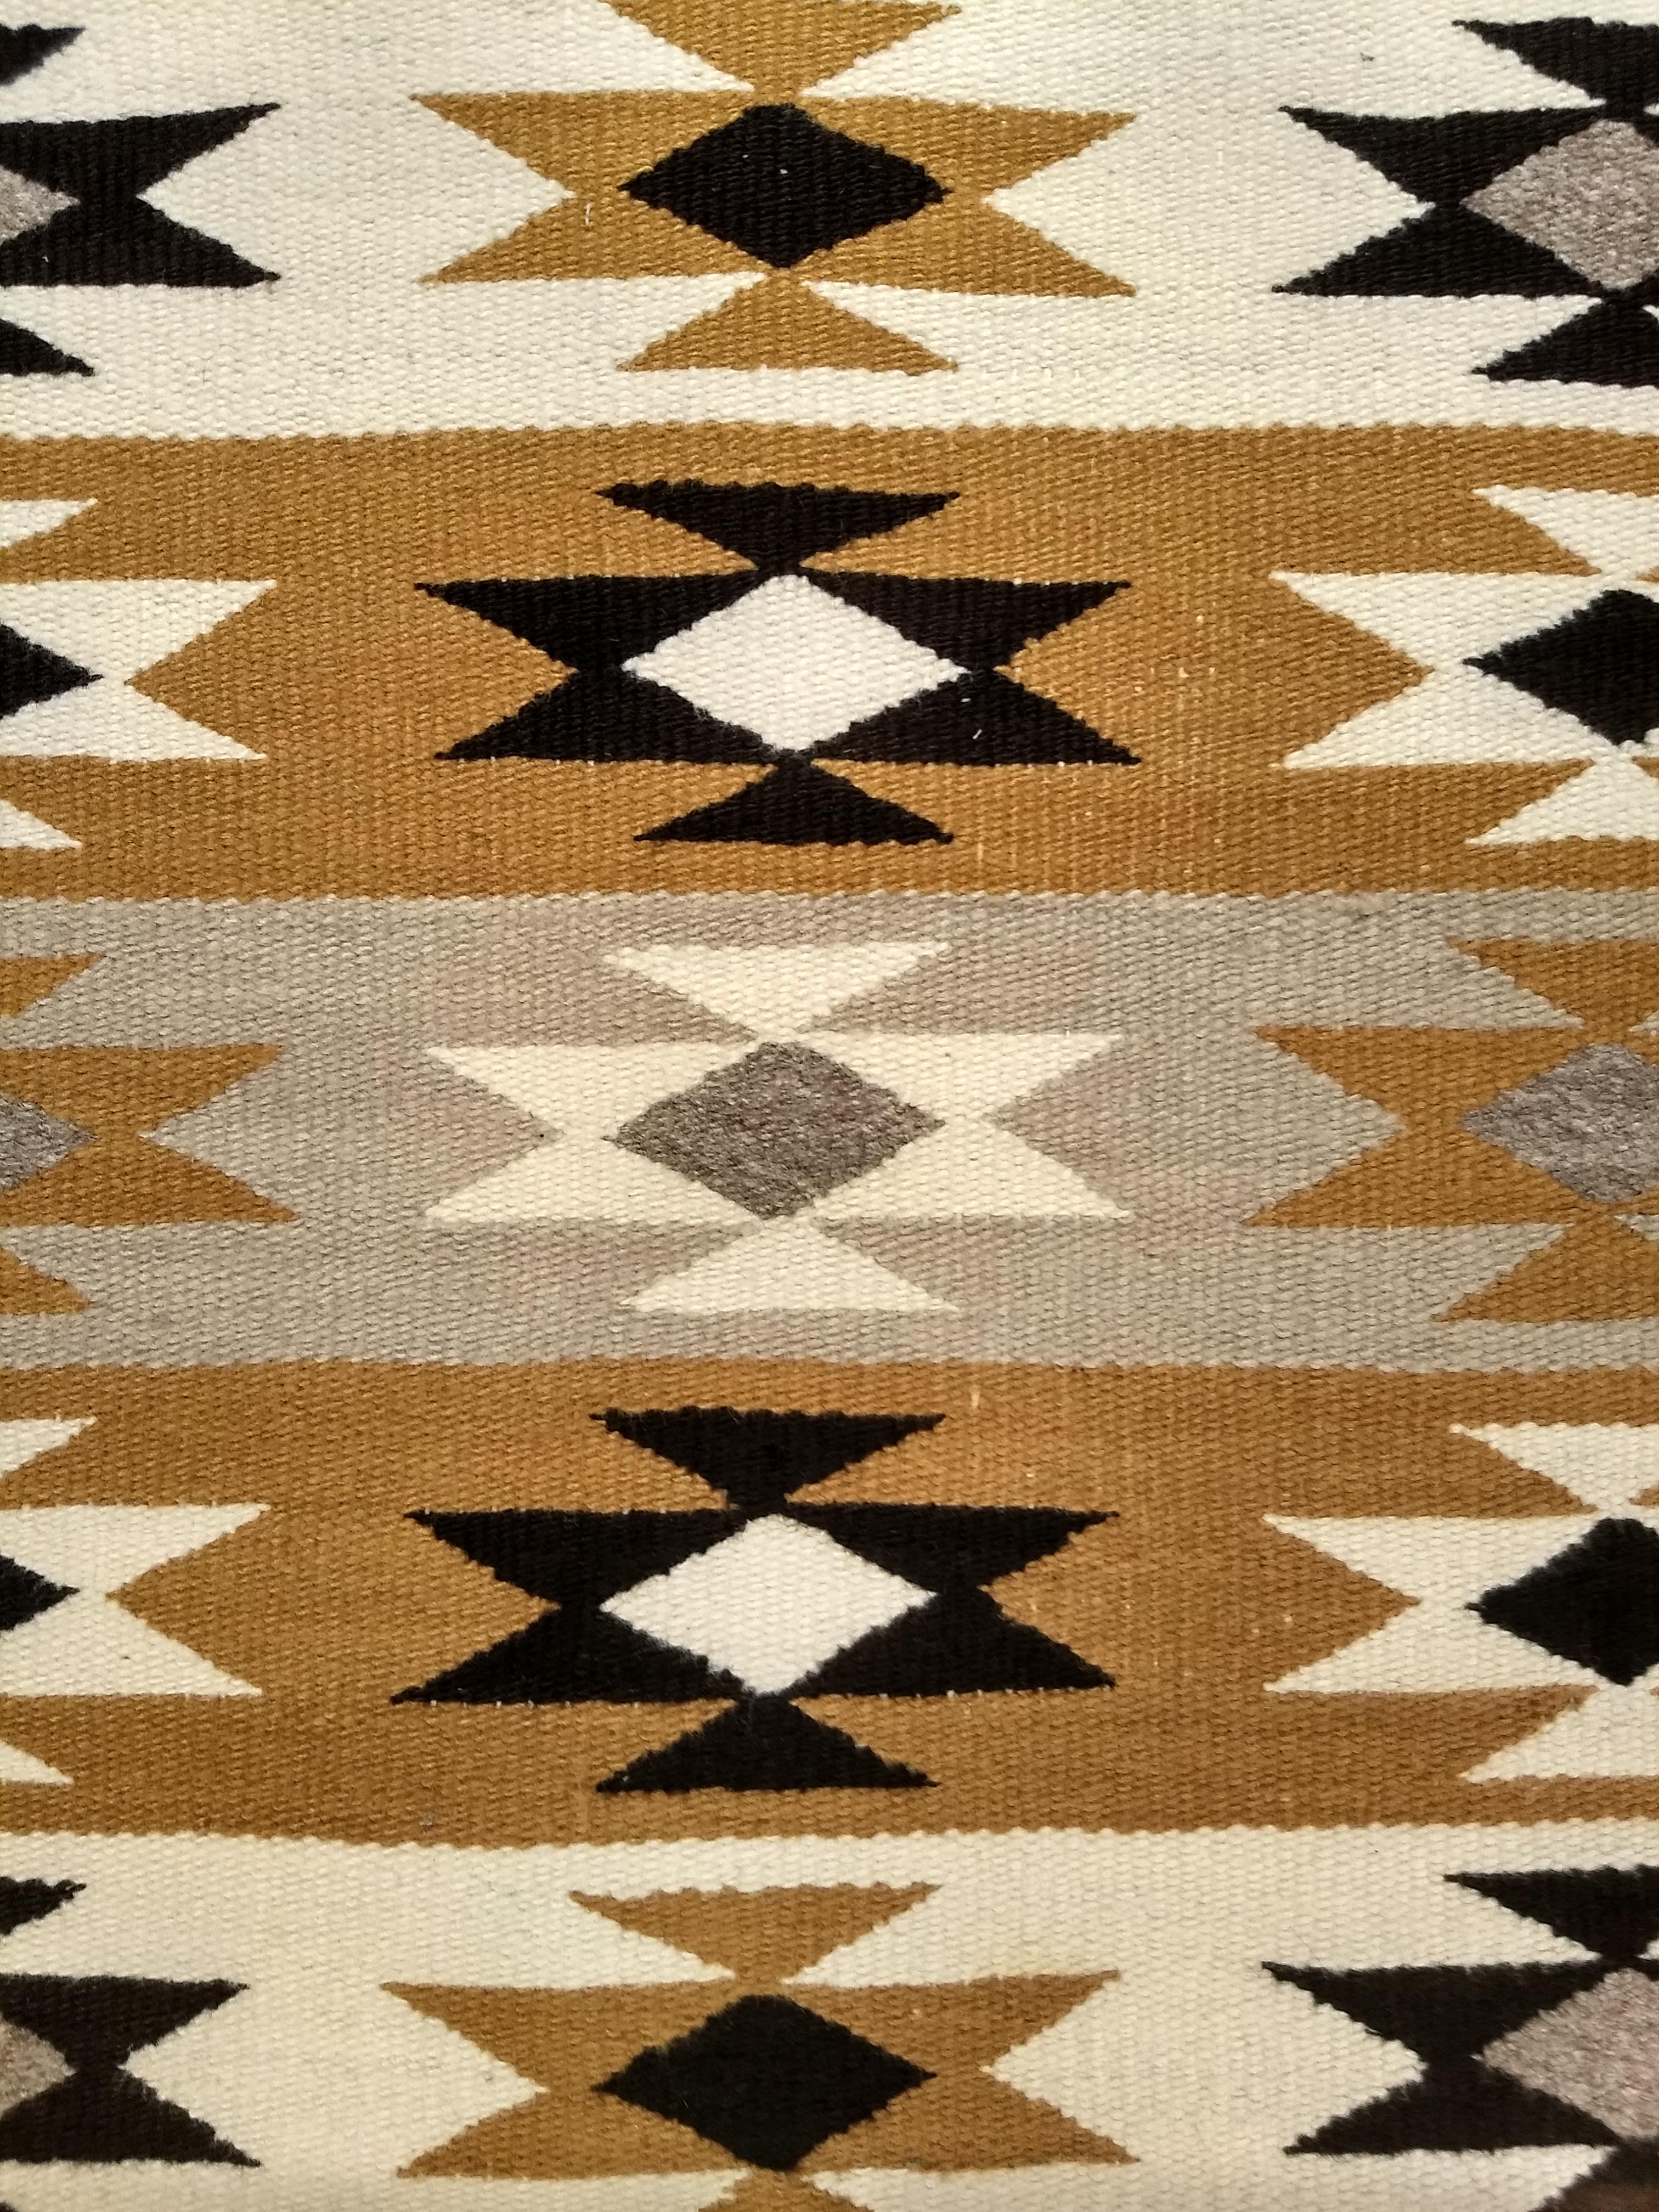 Vintage Native American Navajo Chinle Rug in Yellow, Black, Ivory, Gray, Brown In Good Condition For Sale In Barrington, IL